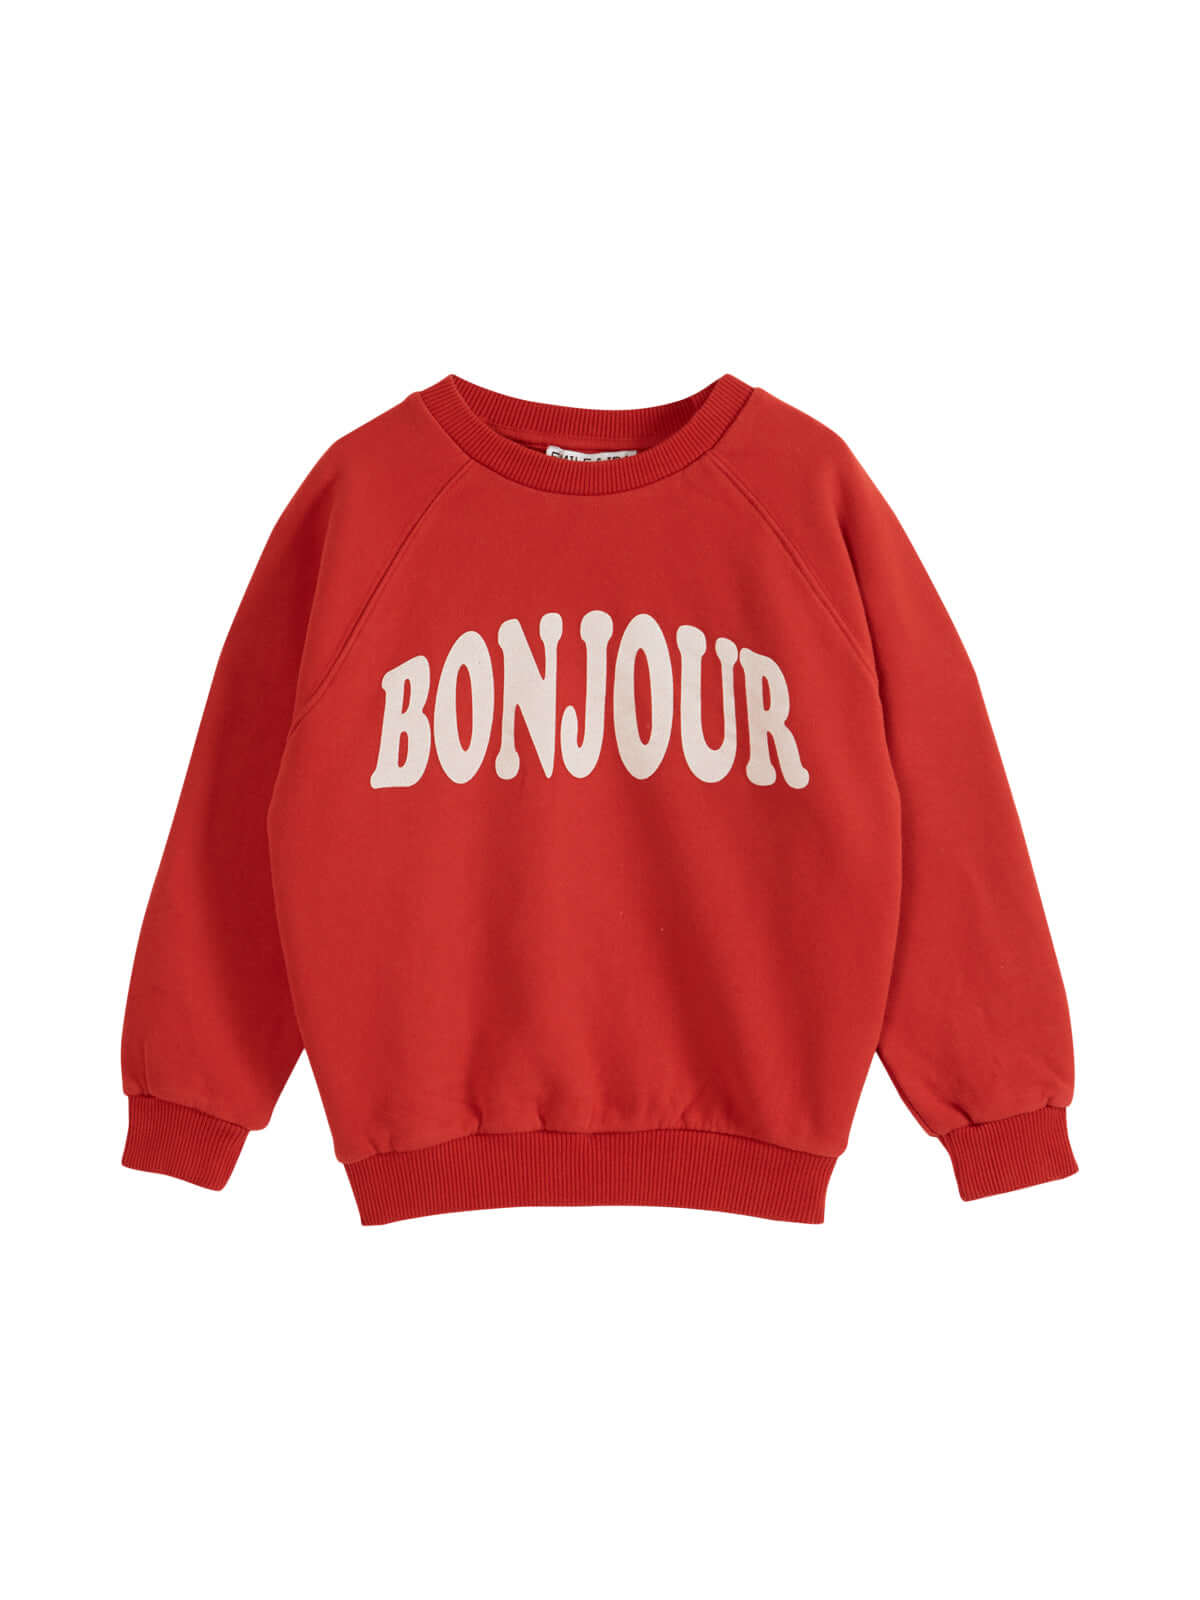 Bonjour French Sweatshirt in Red